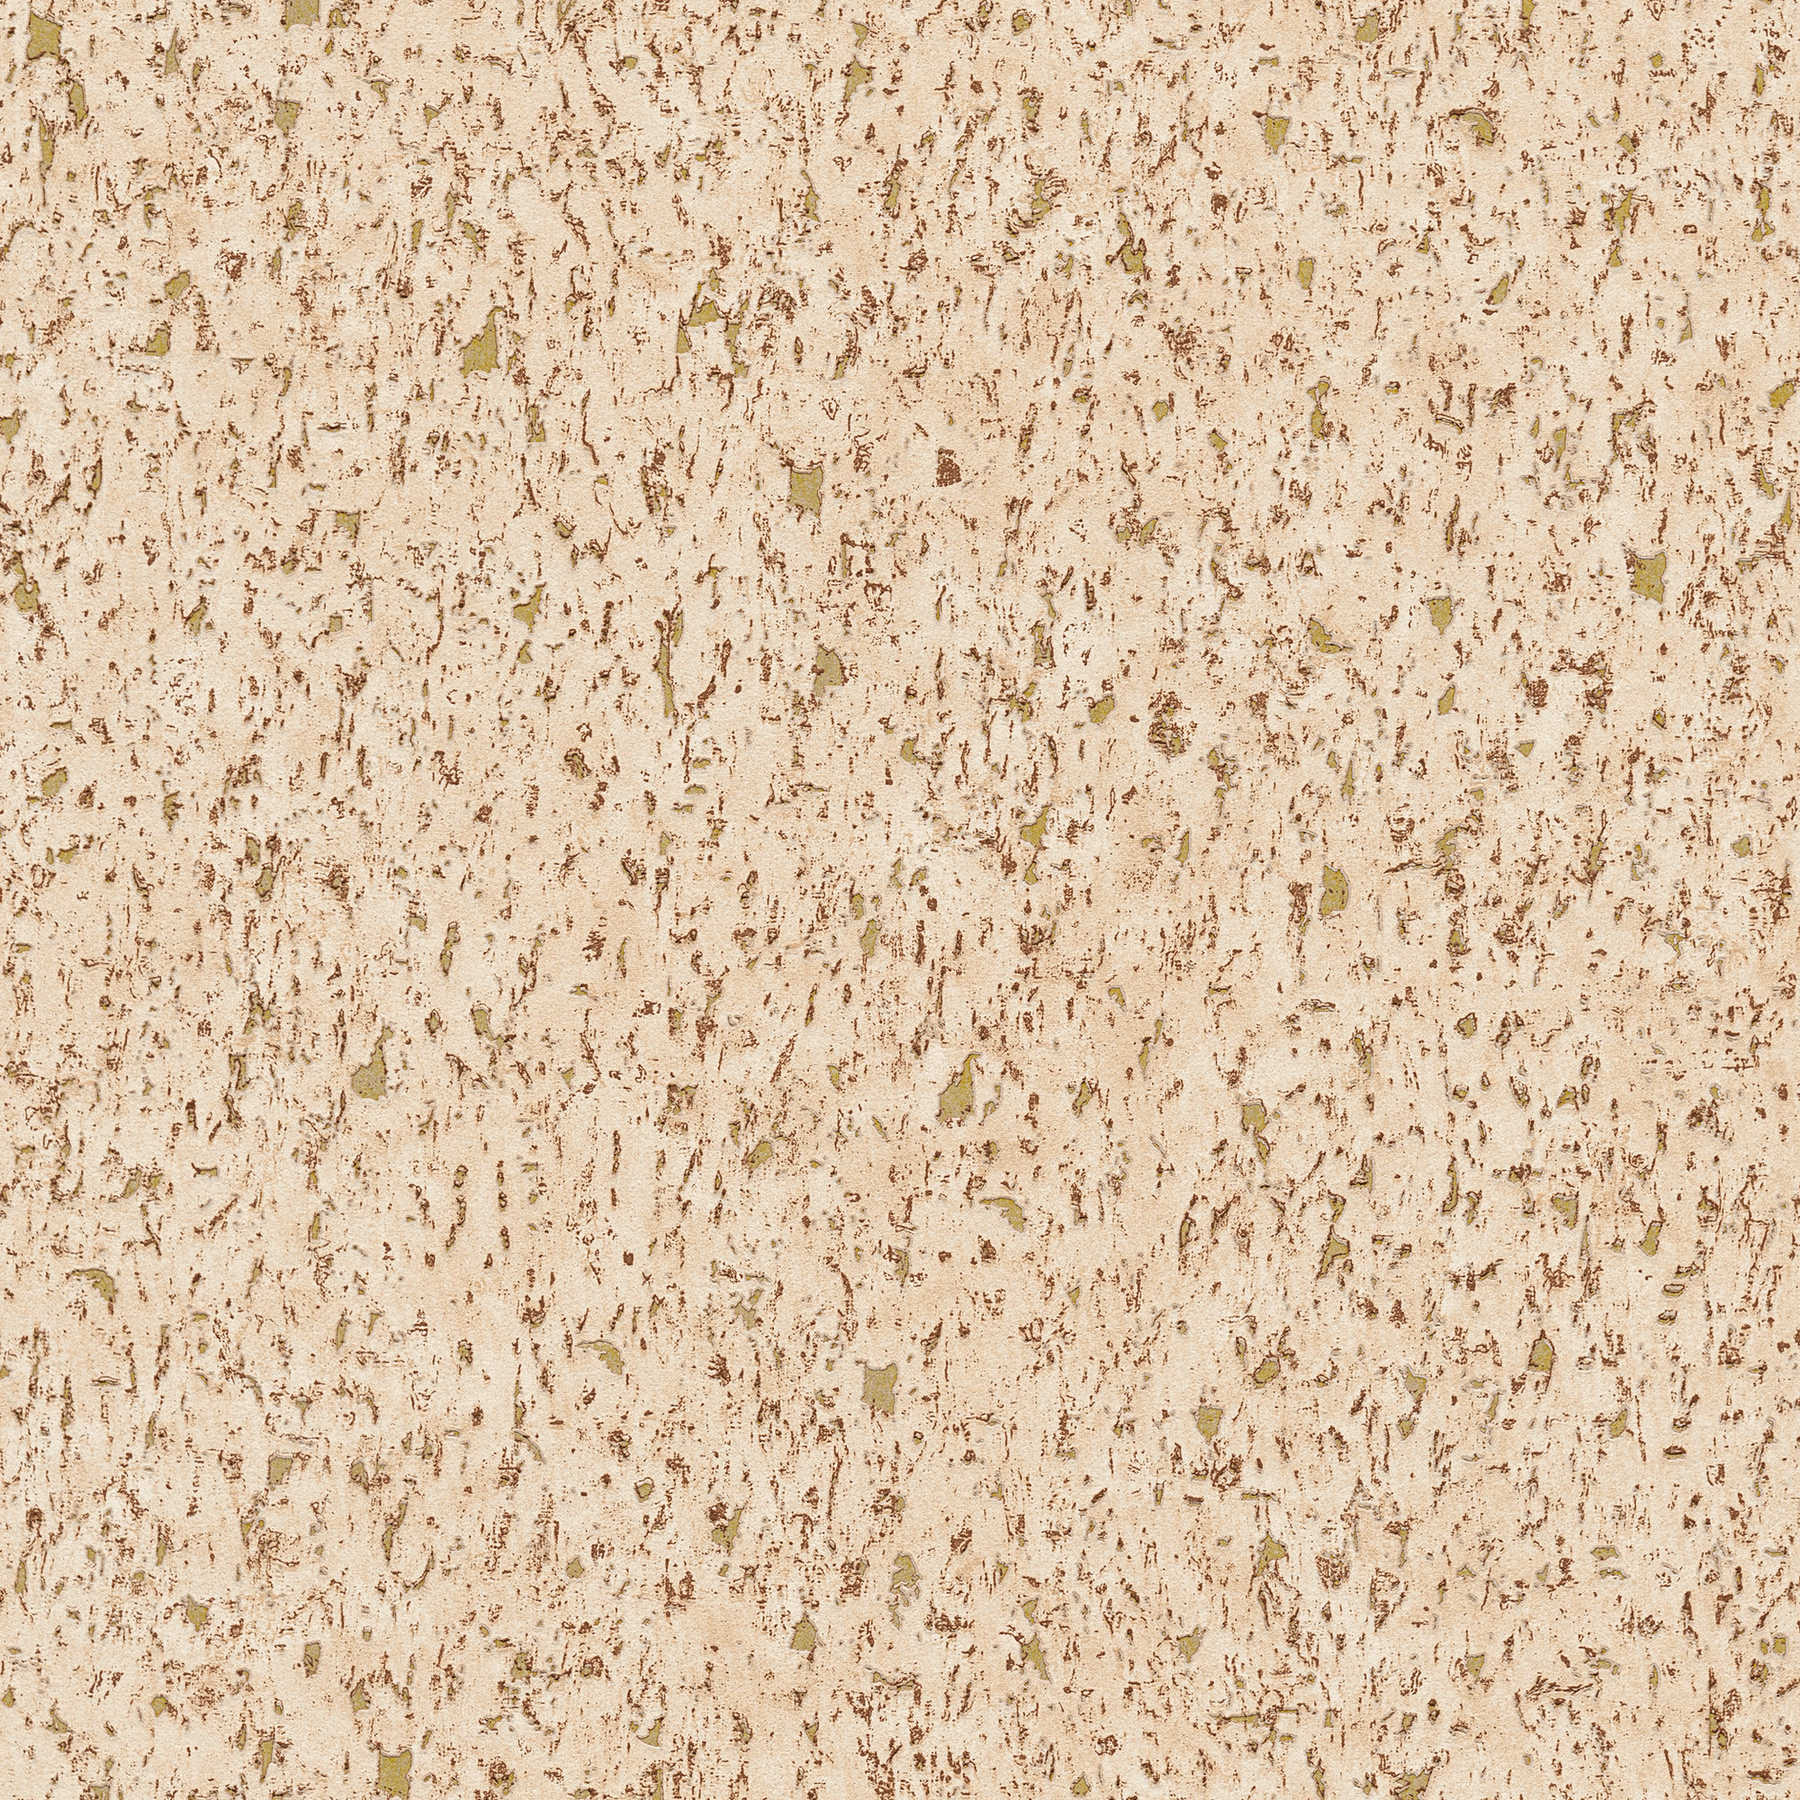 Wallpaper cork structure with metallic accent - brown, cream, gold
